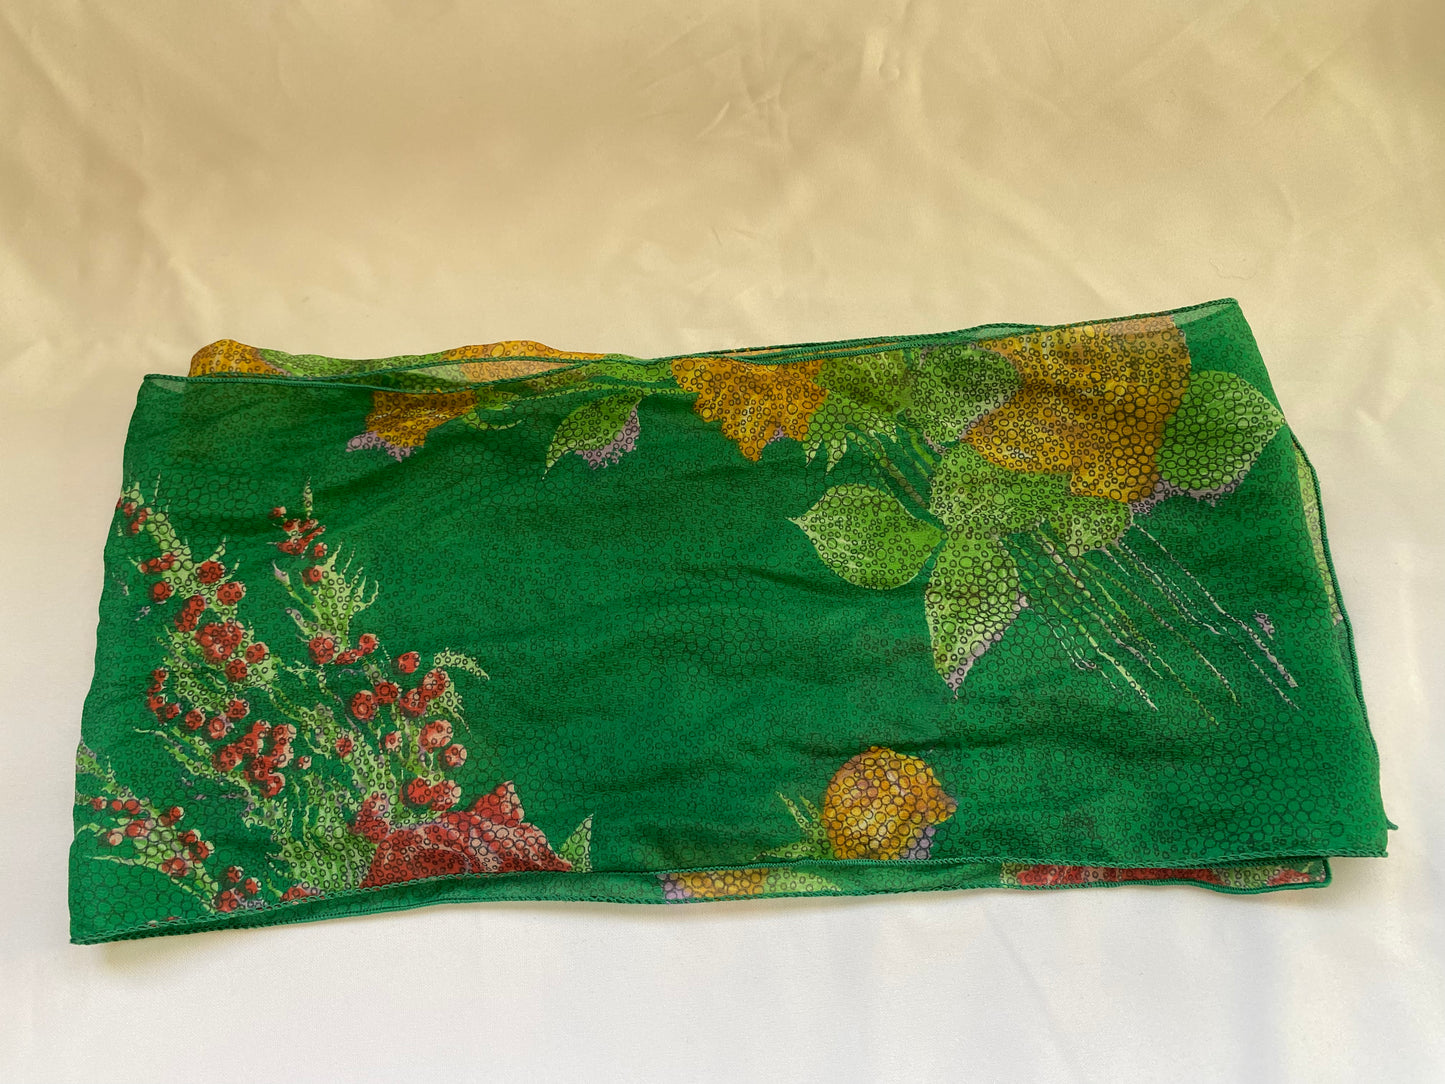 Green Scarf with Floral Designs